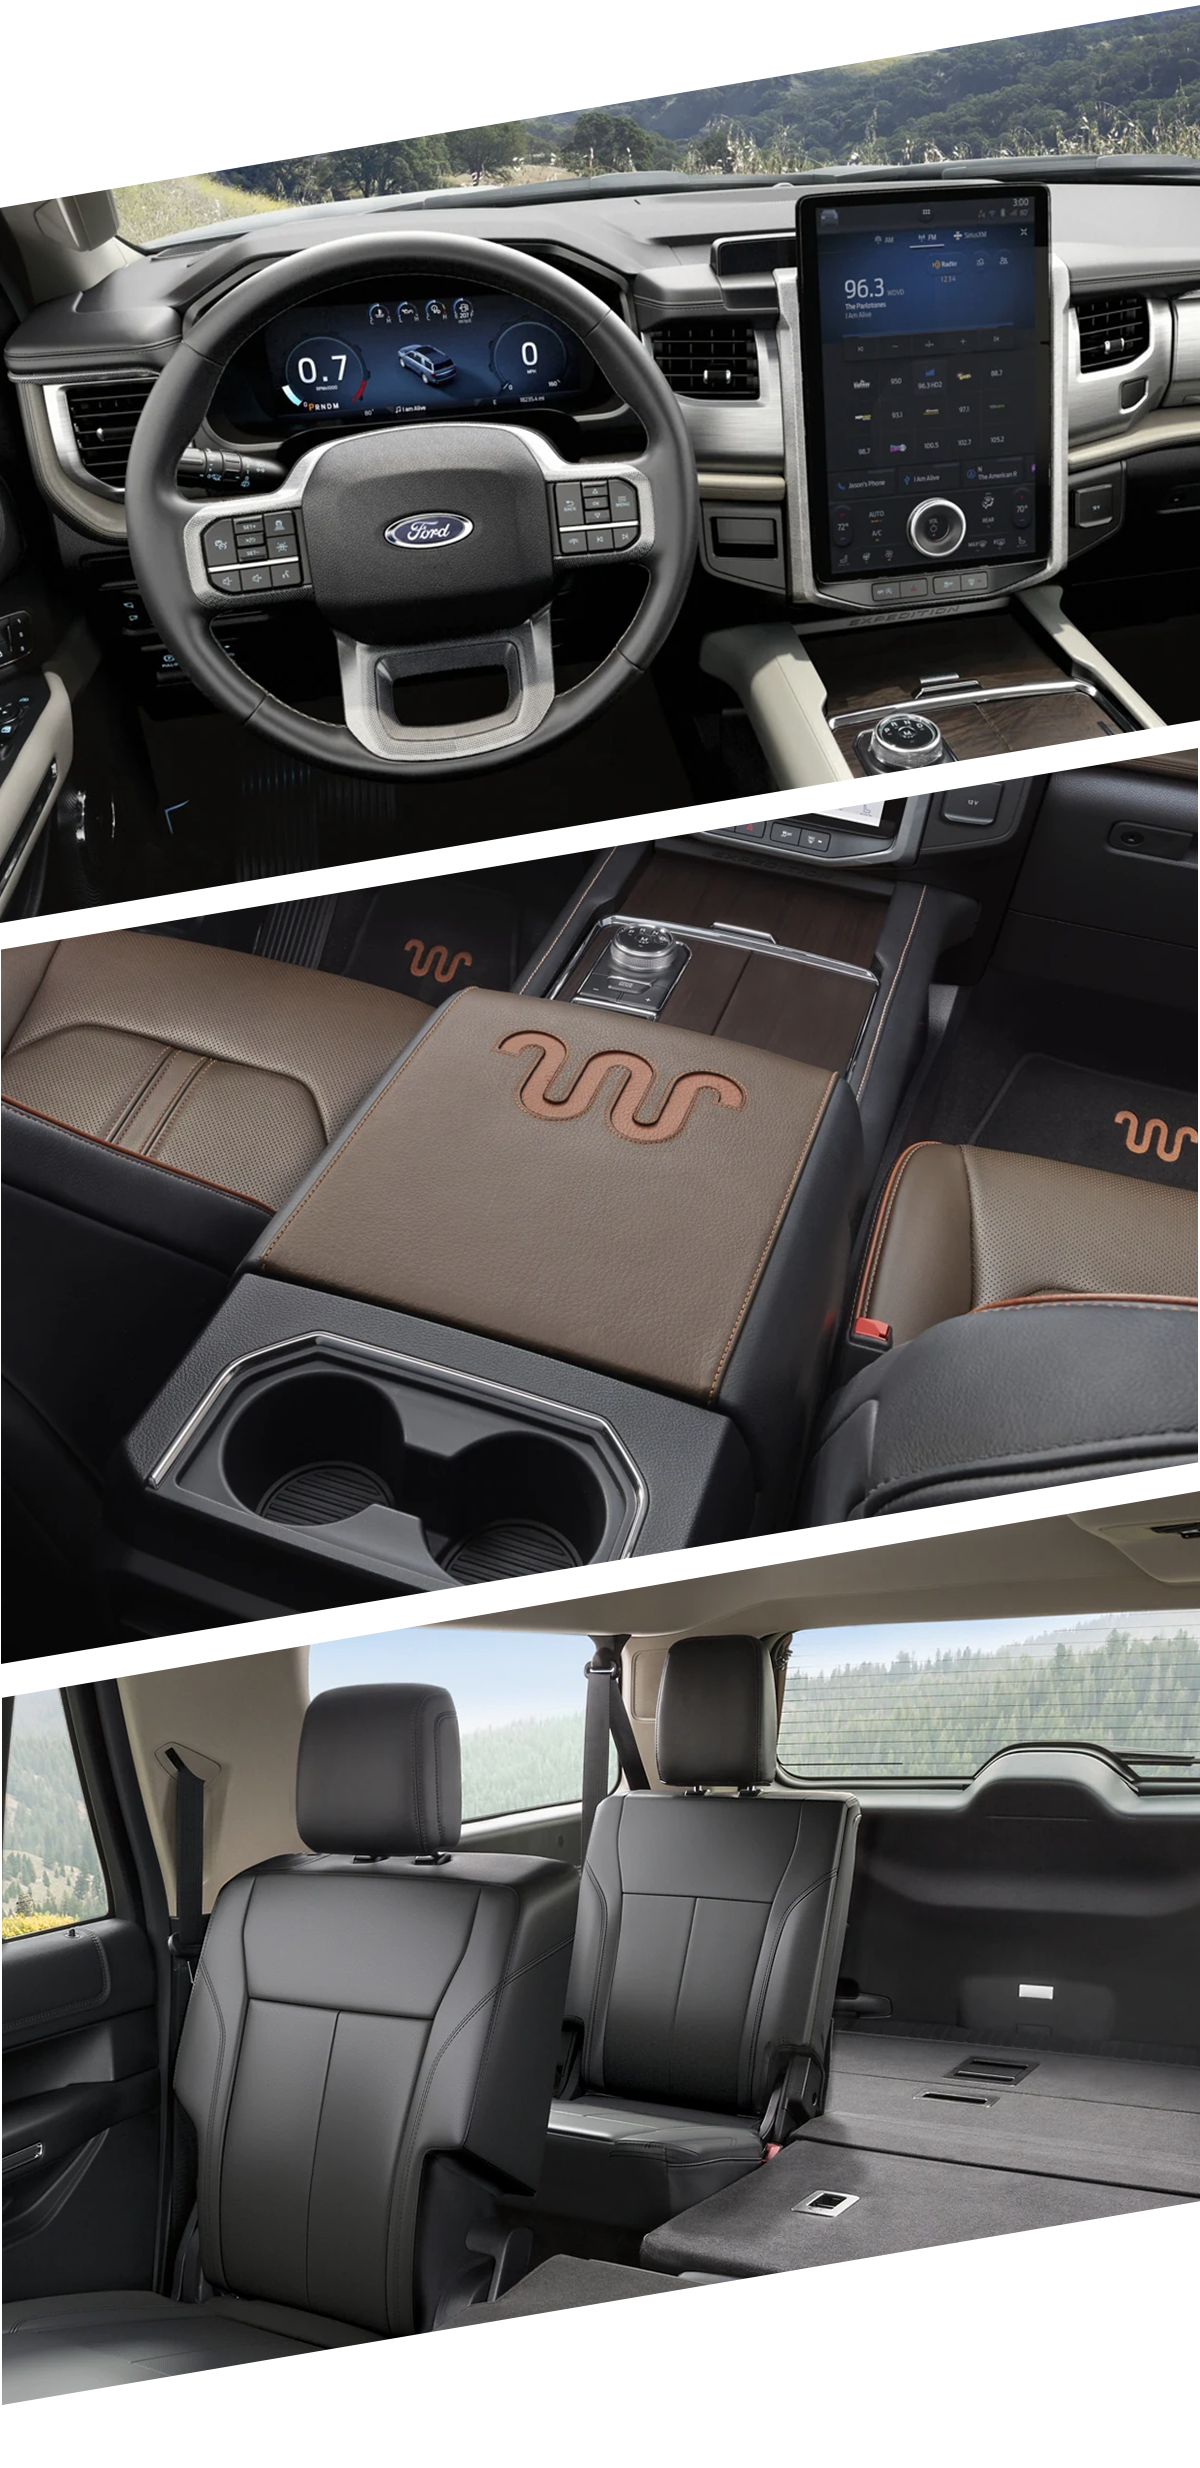 Ford Expedition Interior